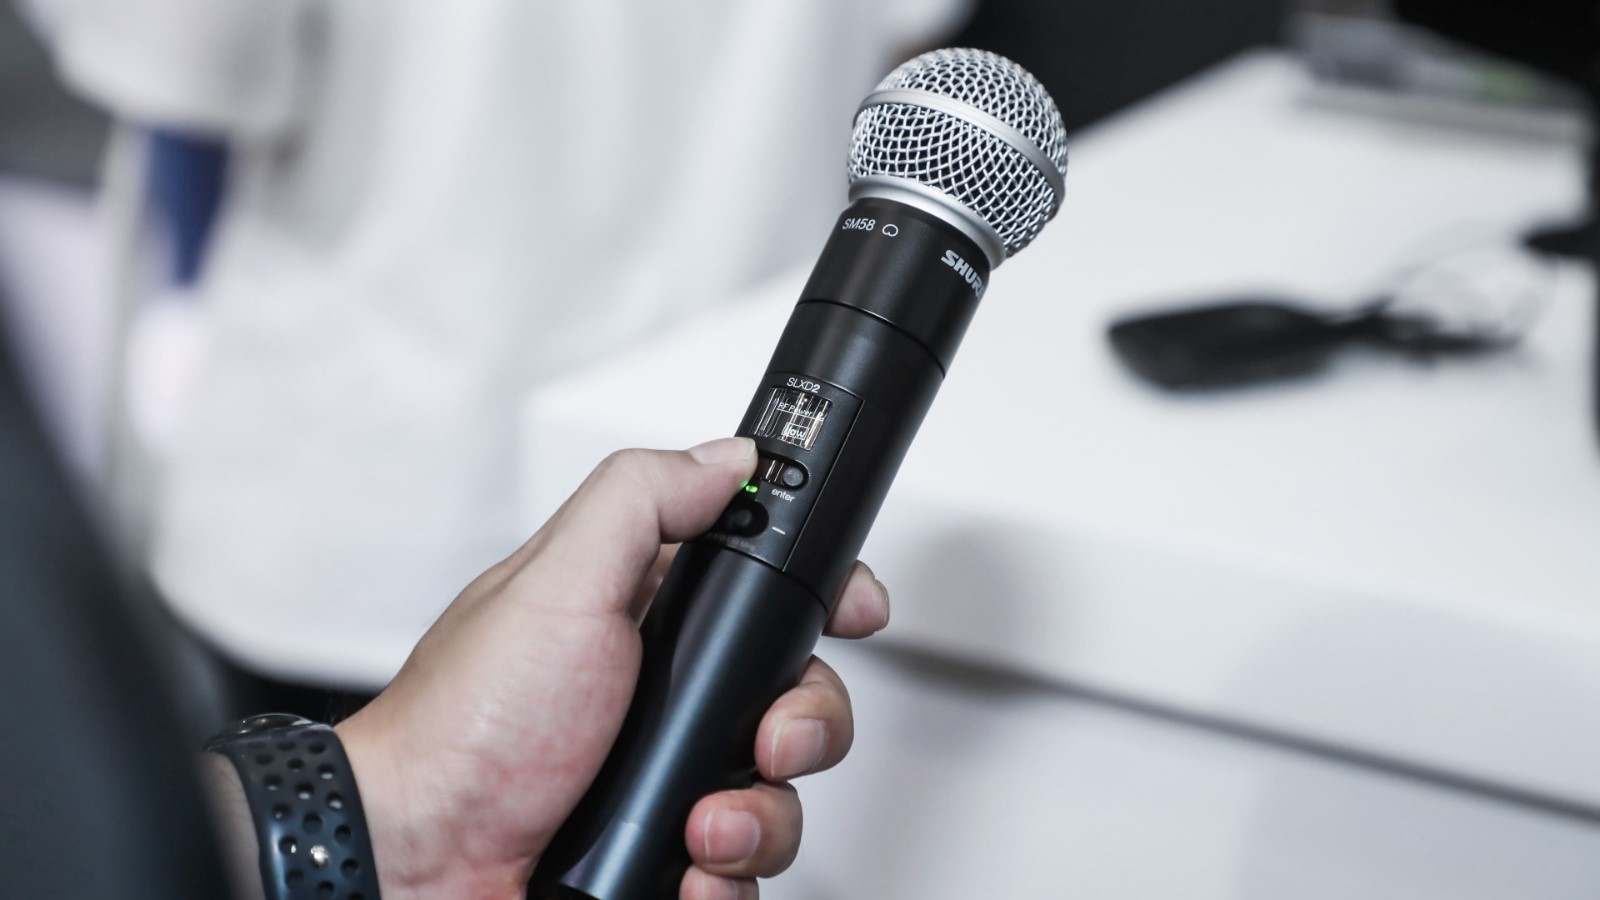 Wireless Microphone Review: Find the Perfect Option for Your Needs